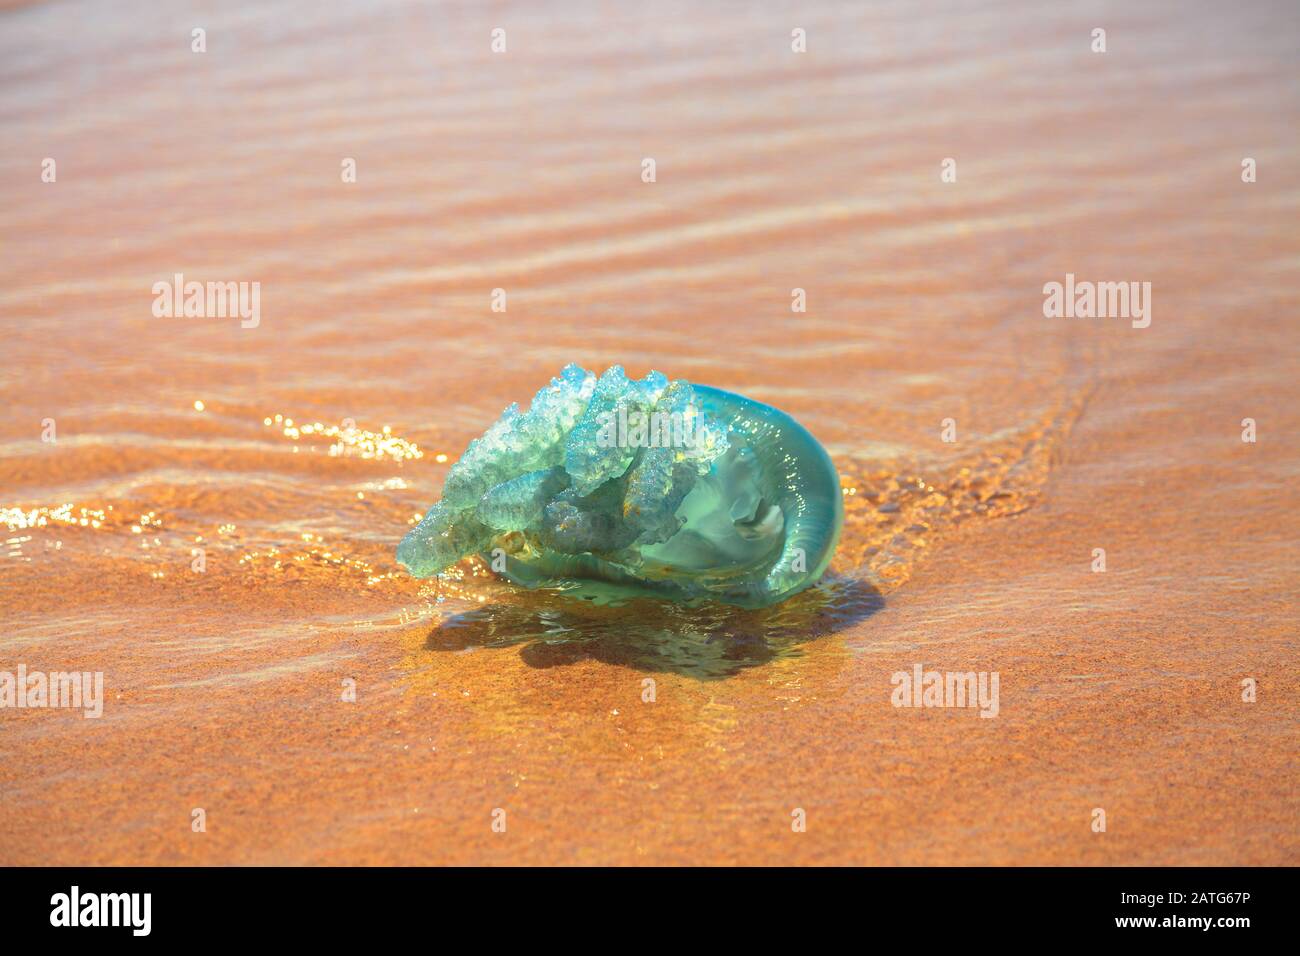 Closeup of blue jellyfish species Velella jellyfish, stranded on the sand in Gold Coast of Queensland on Australian beach. Stock Photo